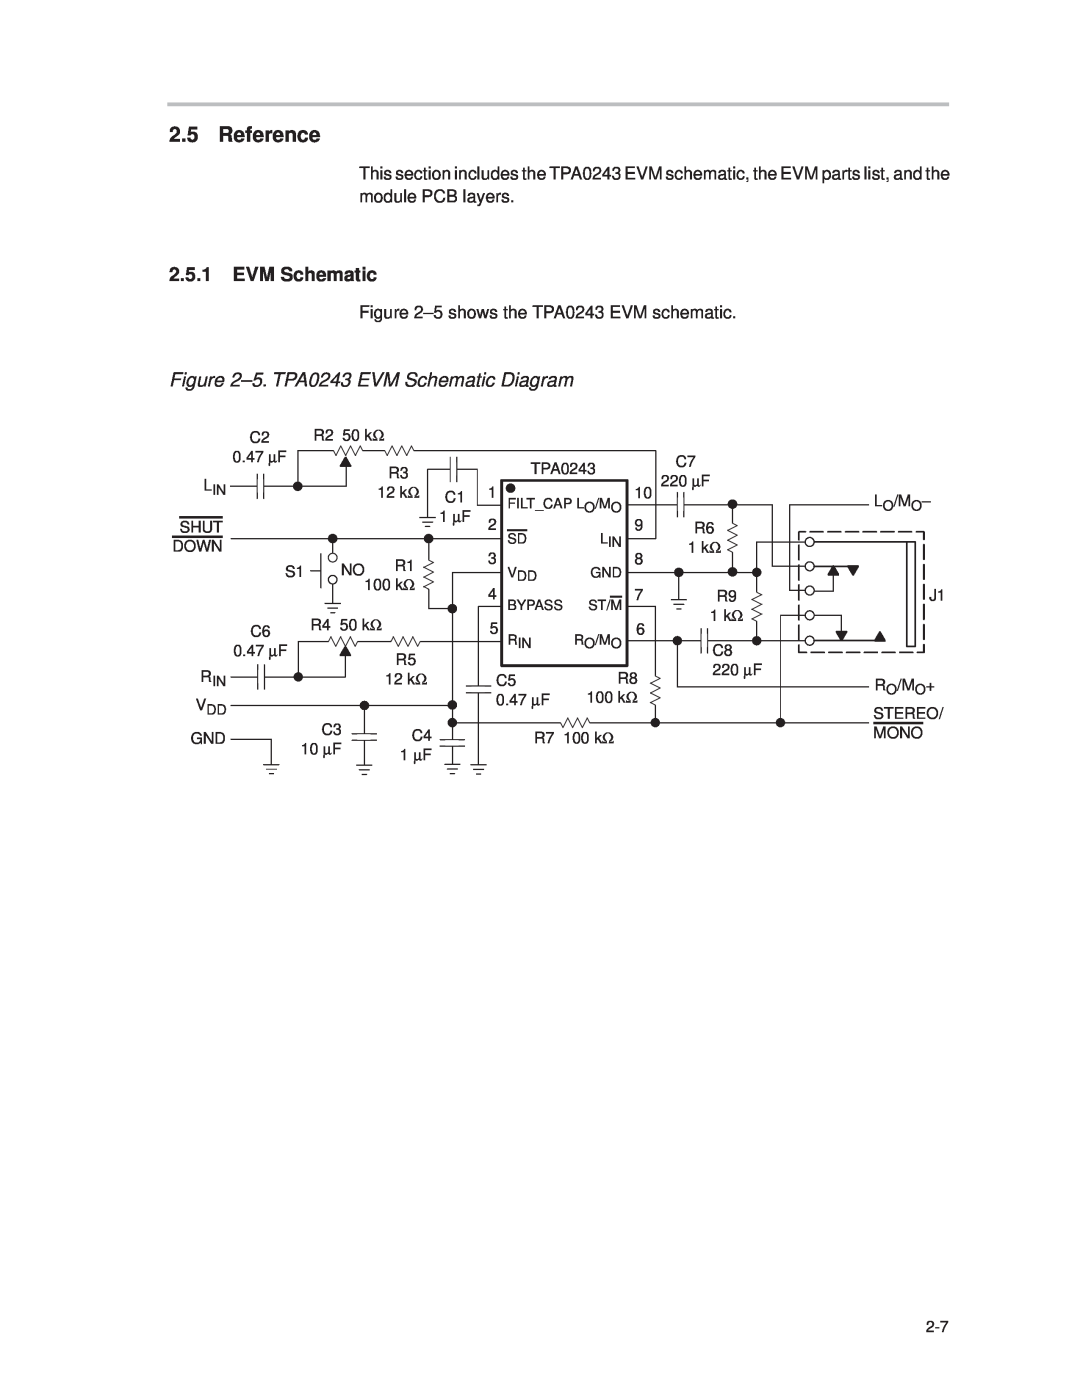 Texas Instruments manual Reference, 2.5.1EVM Schematic, ±5. TPA0243 EVM Schematic Diagram 